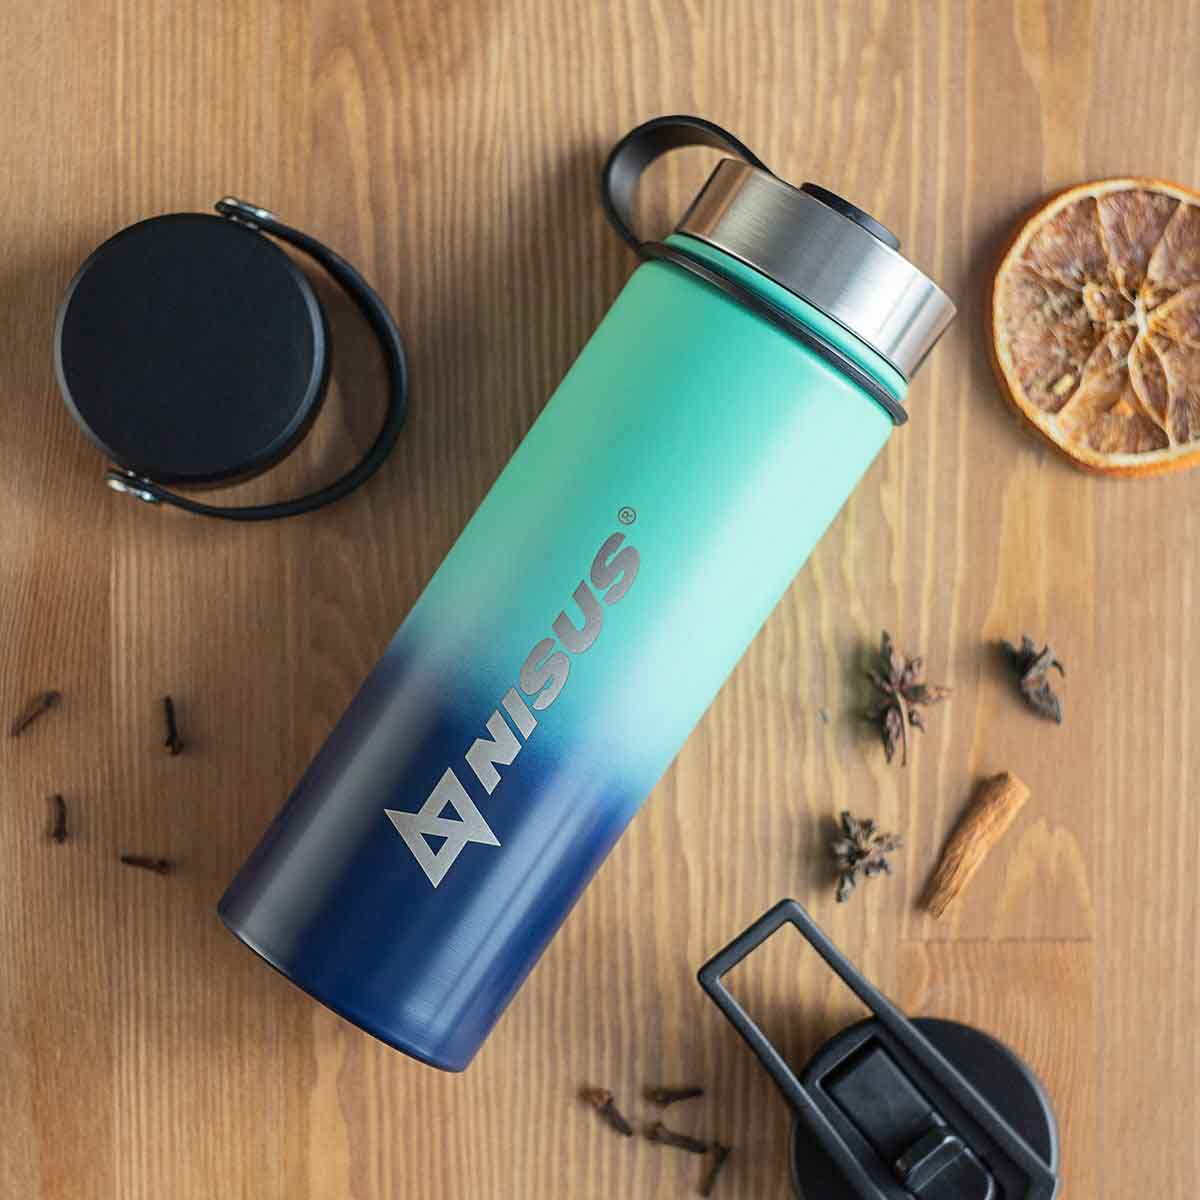 Stainless Steel Water Bottle with 3 Lid Types, 18 oz, Double Colored